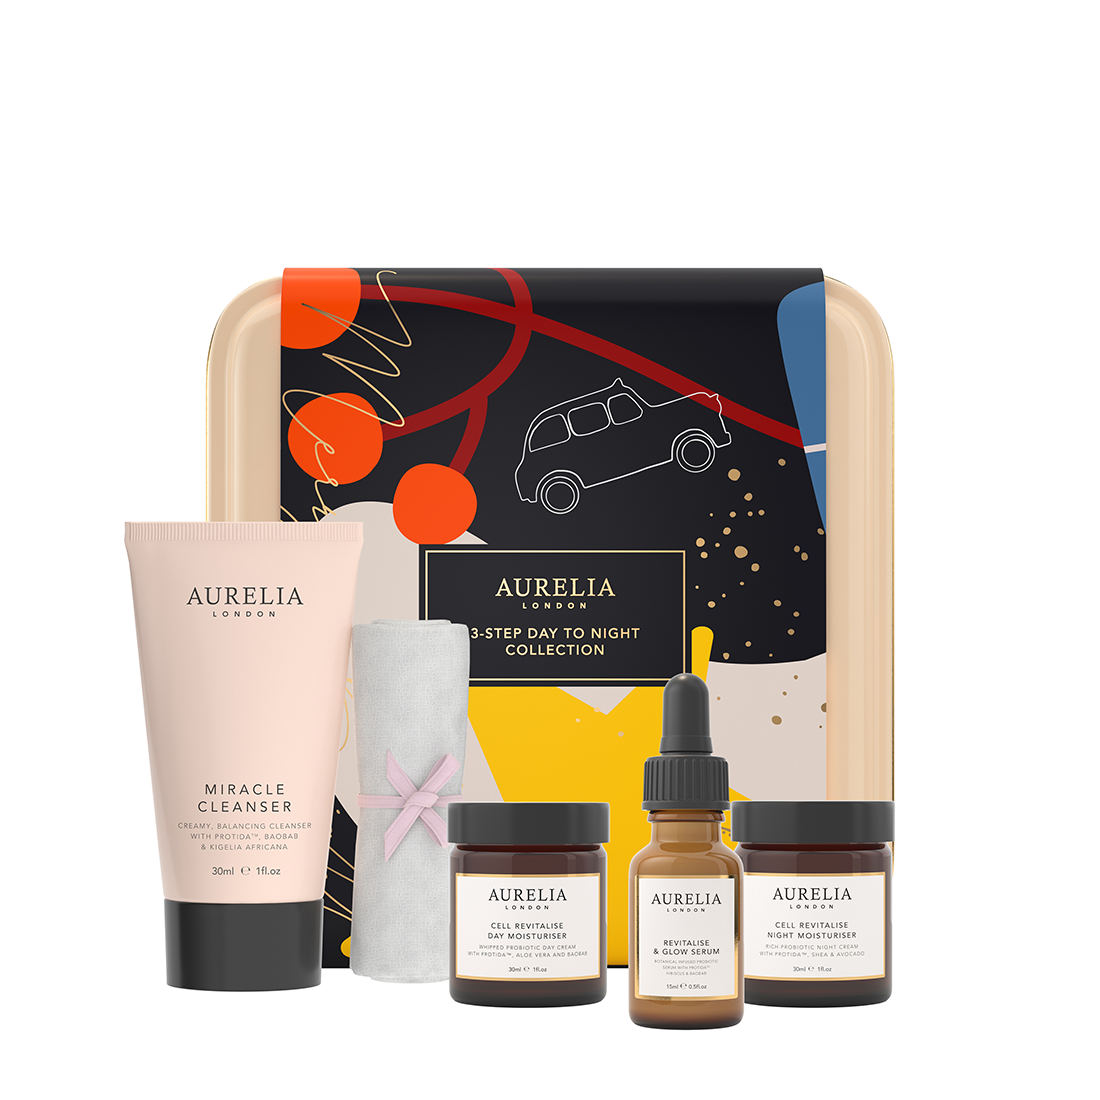 An image of Aurelia London, 3-Step Day to Night Collection (worth £120), Skincare Gift Set